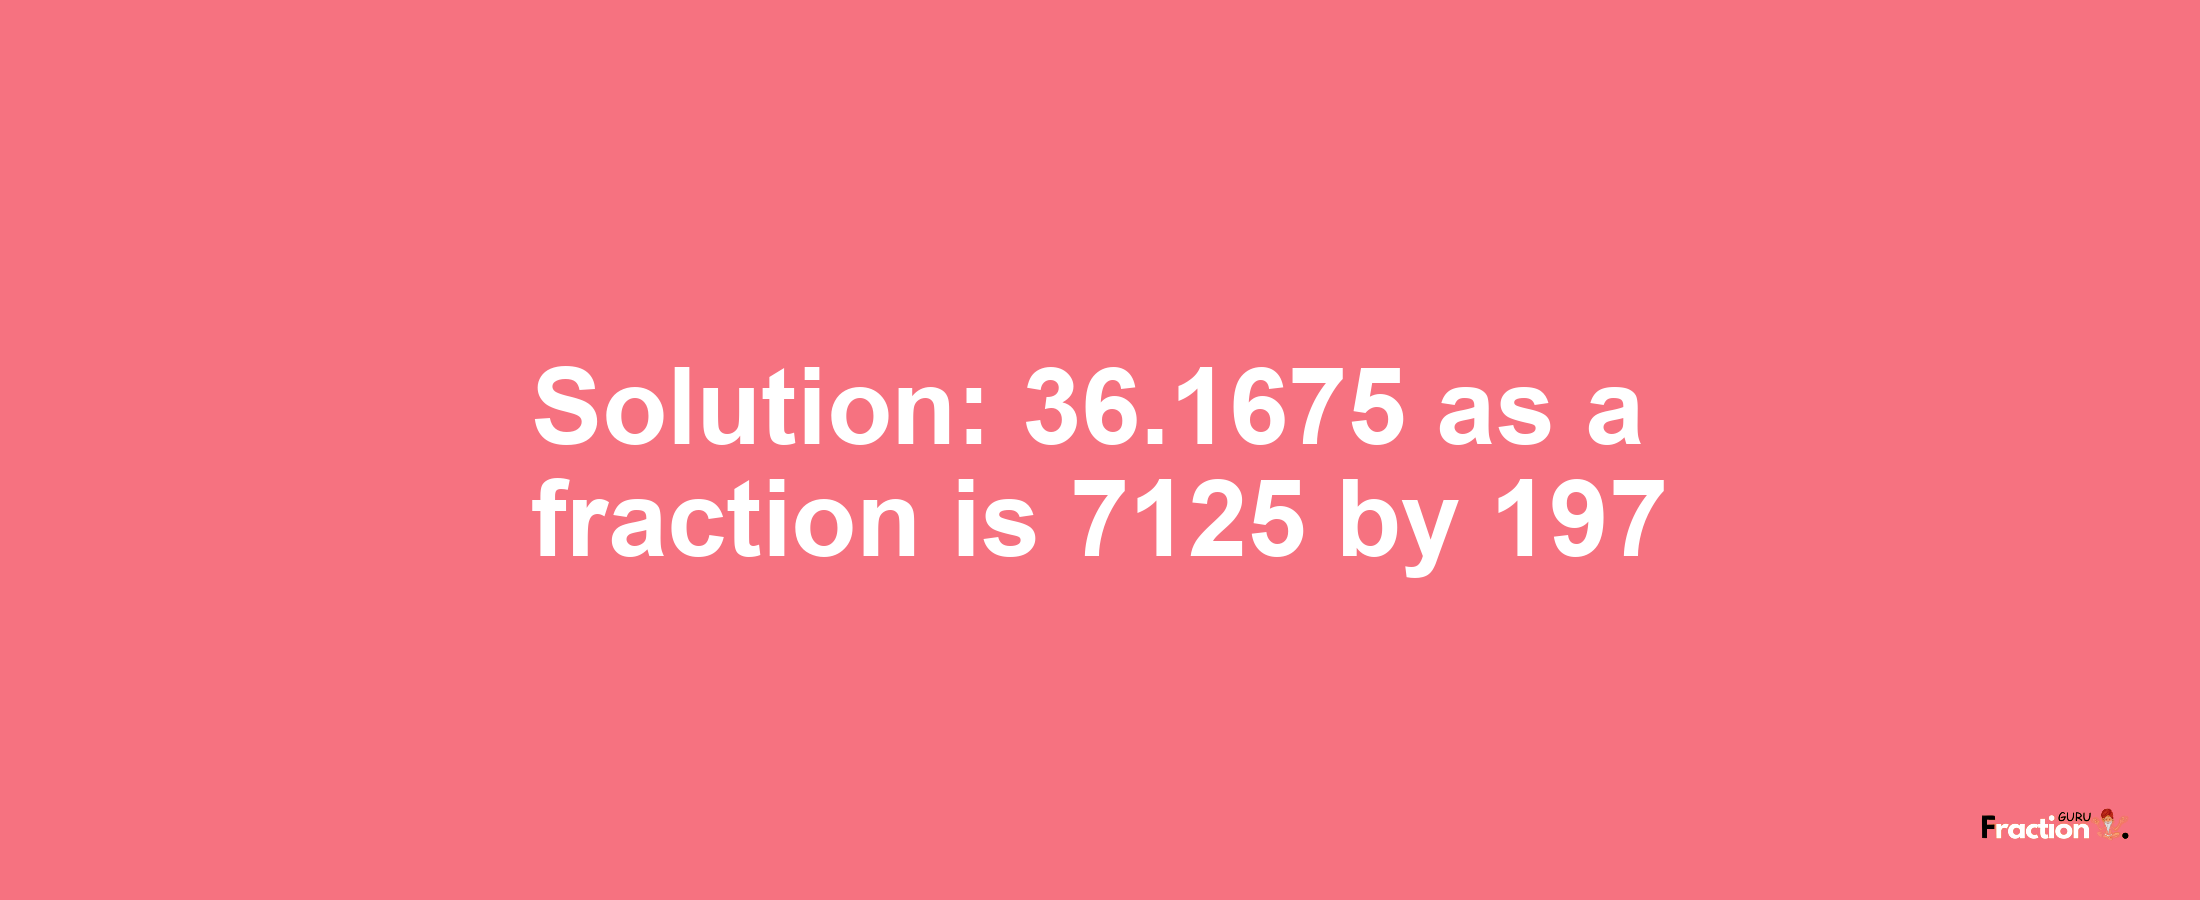 Solution:36.1675 as a fraction is 7125/197